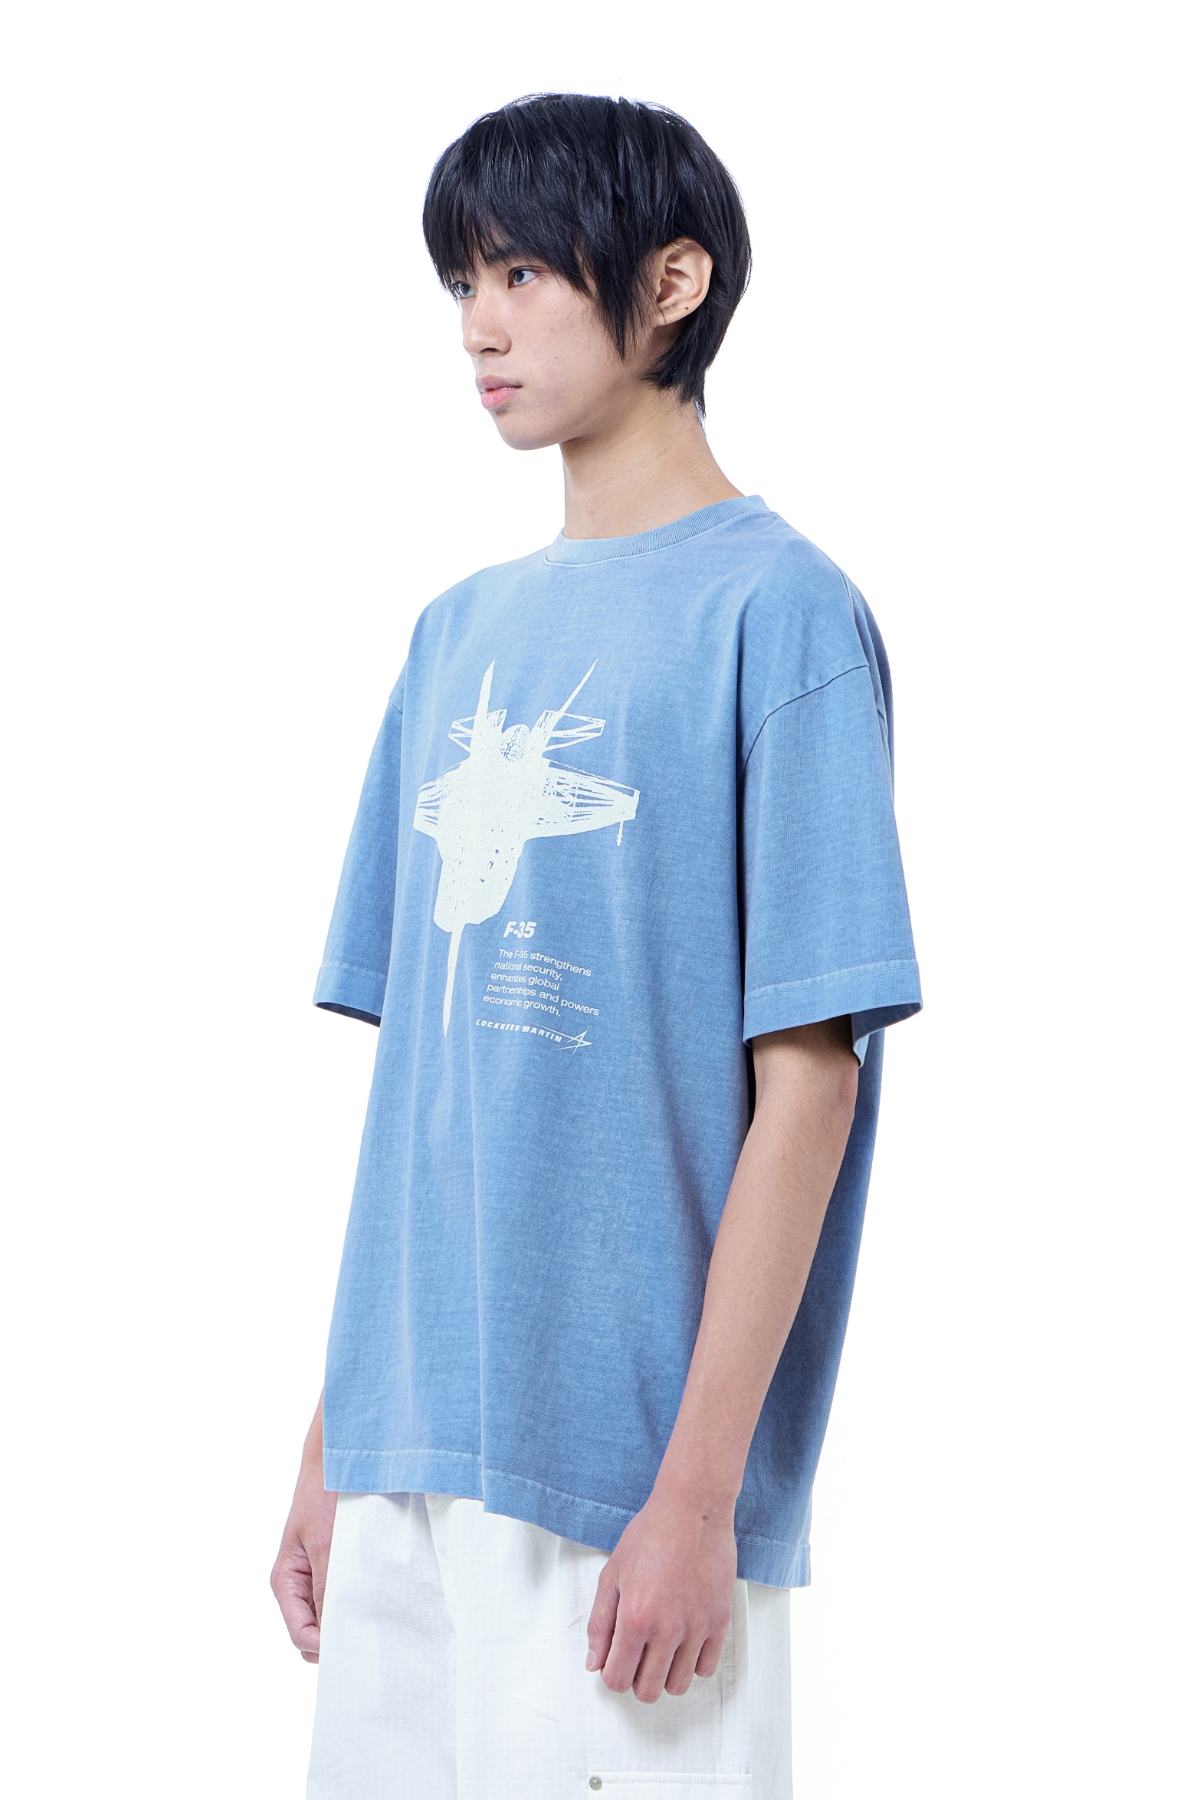 LM F-35 GRAPHIC GARMENT DYED OVER T-SHIRT (BLUE)